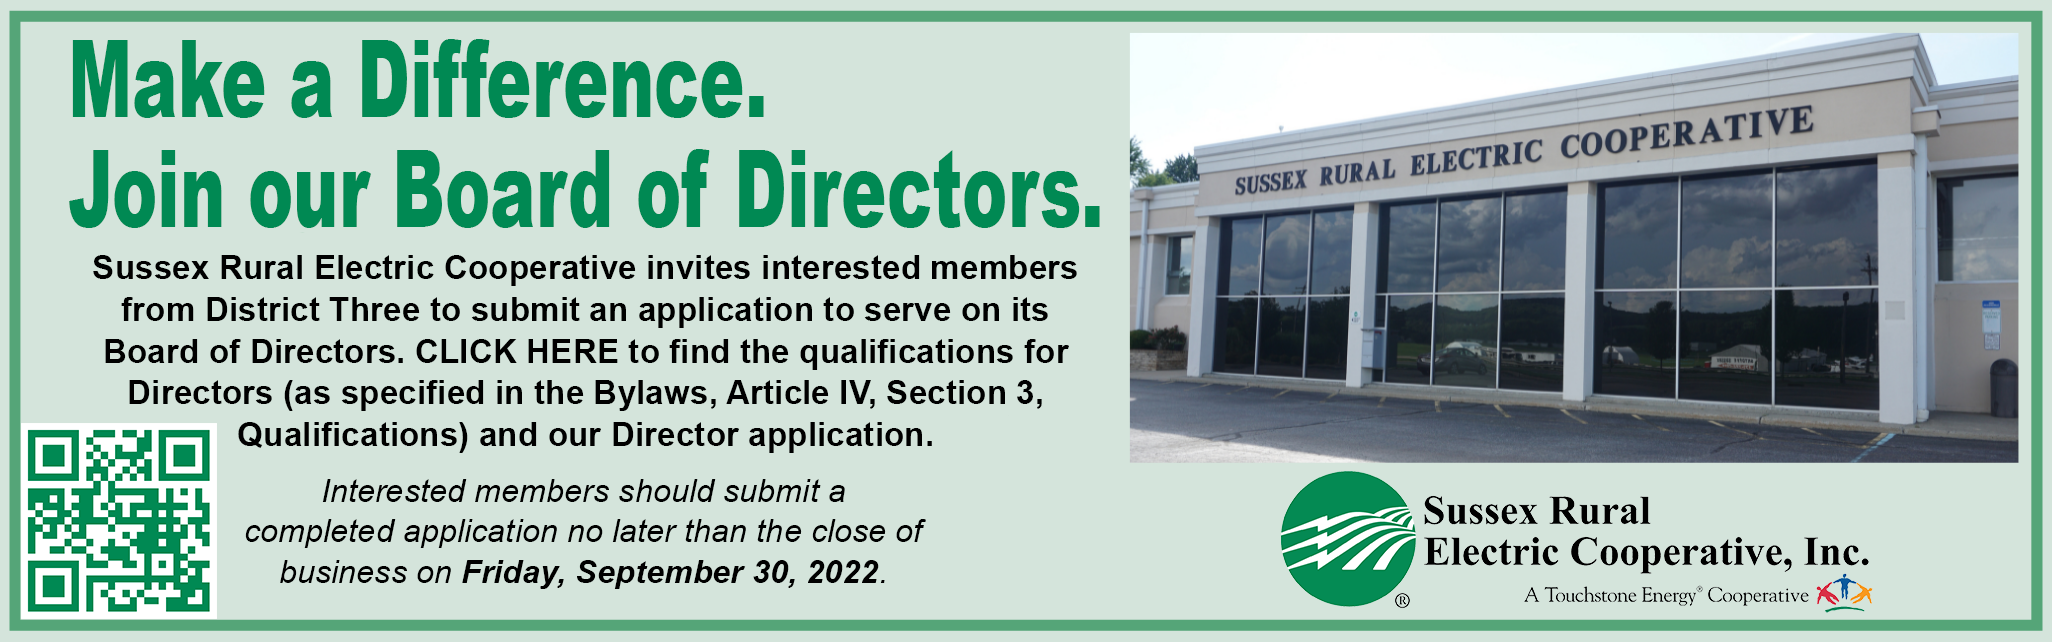 Make a difference. Join our Board of Directors. Sussex Rural Electric Cooperative invites interested members from District Three to submit an application to serve on its Board of Directors. CLICK HERE to find the qualifications for Directors (as specified in the Bylaws, Article IV, Section 3, Qualifications) and our Director application. Interested members should submit a completed application no later than the close of business on Friday, September 30, 2022.